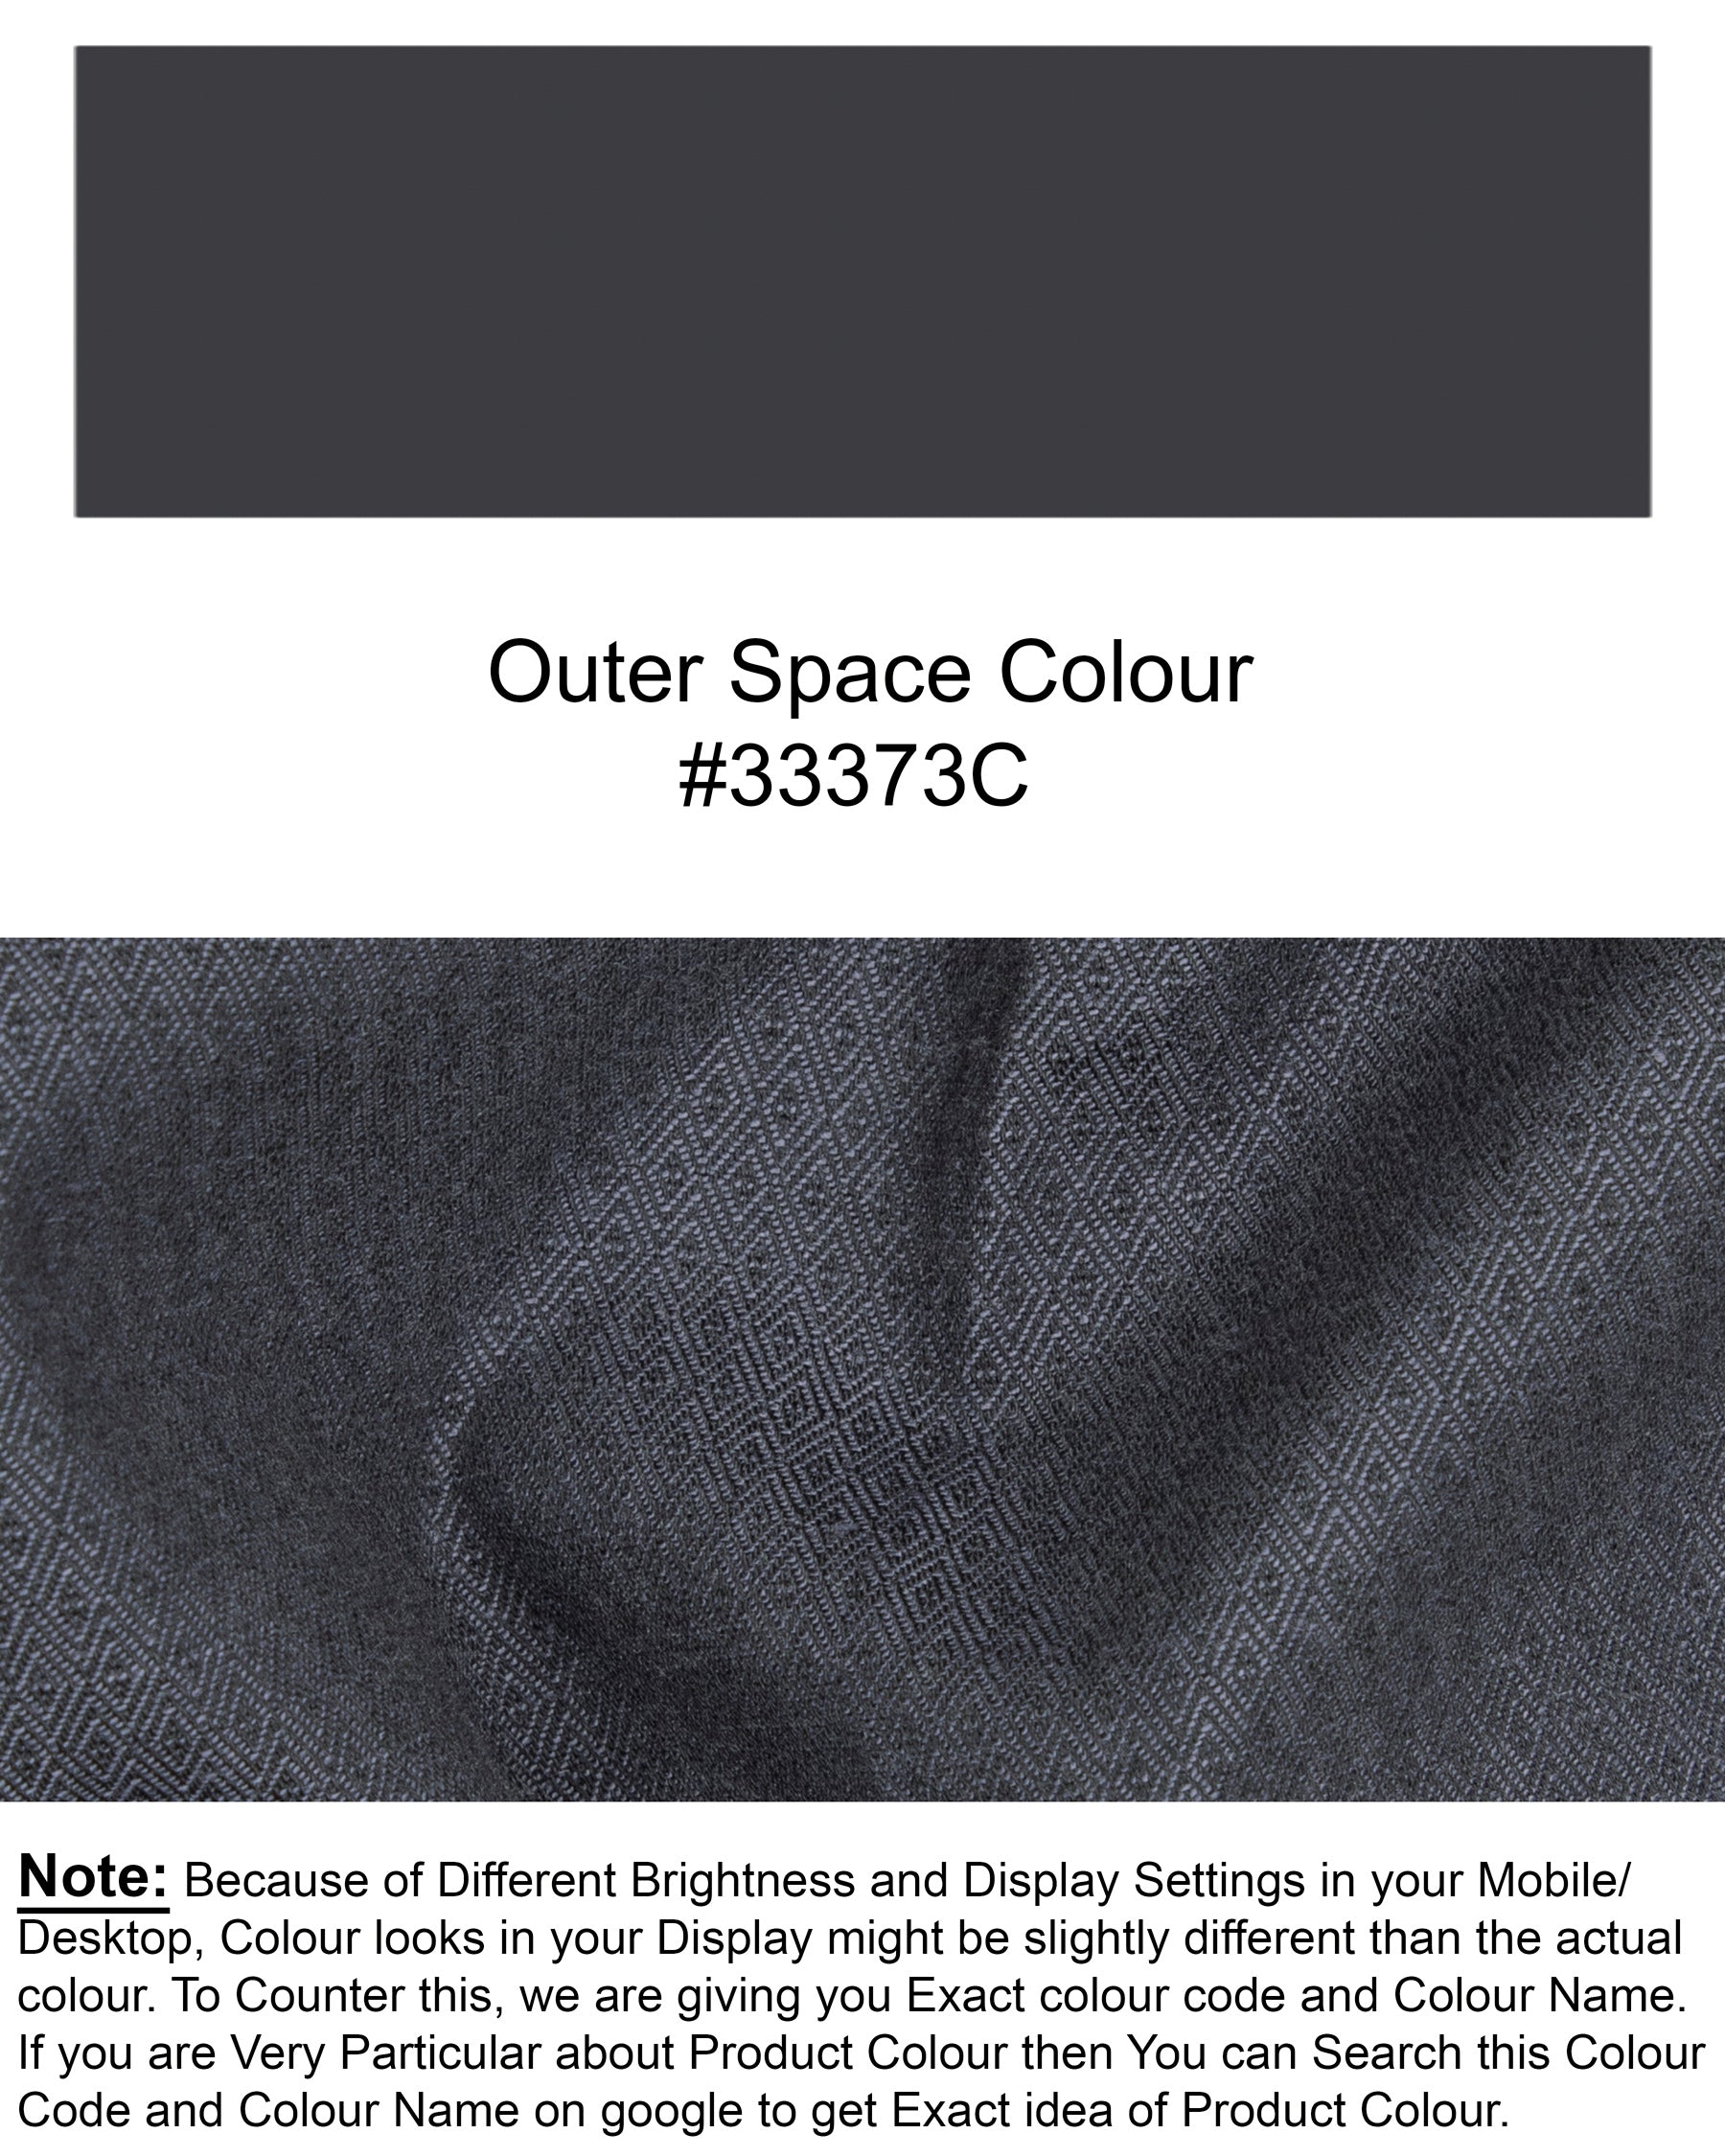 Outer Space STue Cross Buttoned Wool Rich Bandhgala/Mandarin Suit ST1257-CBG-46, ST1257-CBG-48, ST1257-CBG-50, ST1257-CBG-52, ST1257-CBG-54, ST1257-CBG-56, ST1257-CBG-58, ST1257-CBG-60, ST1257-CBG-36, ST1257-CBG-38, ST1257-CBG-40, ST1257-CBG-42, ST1257-CBG-44